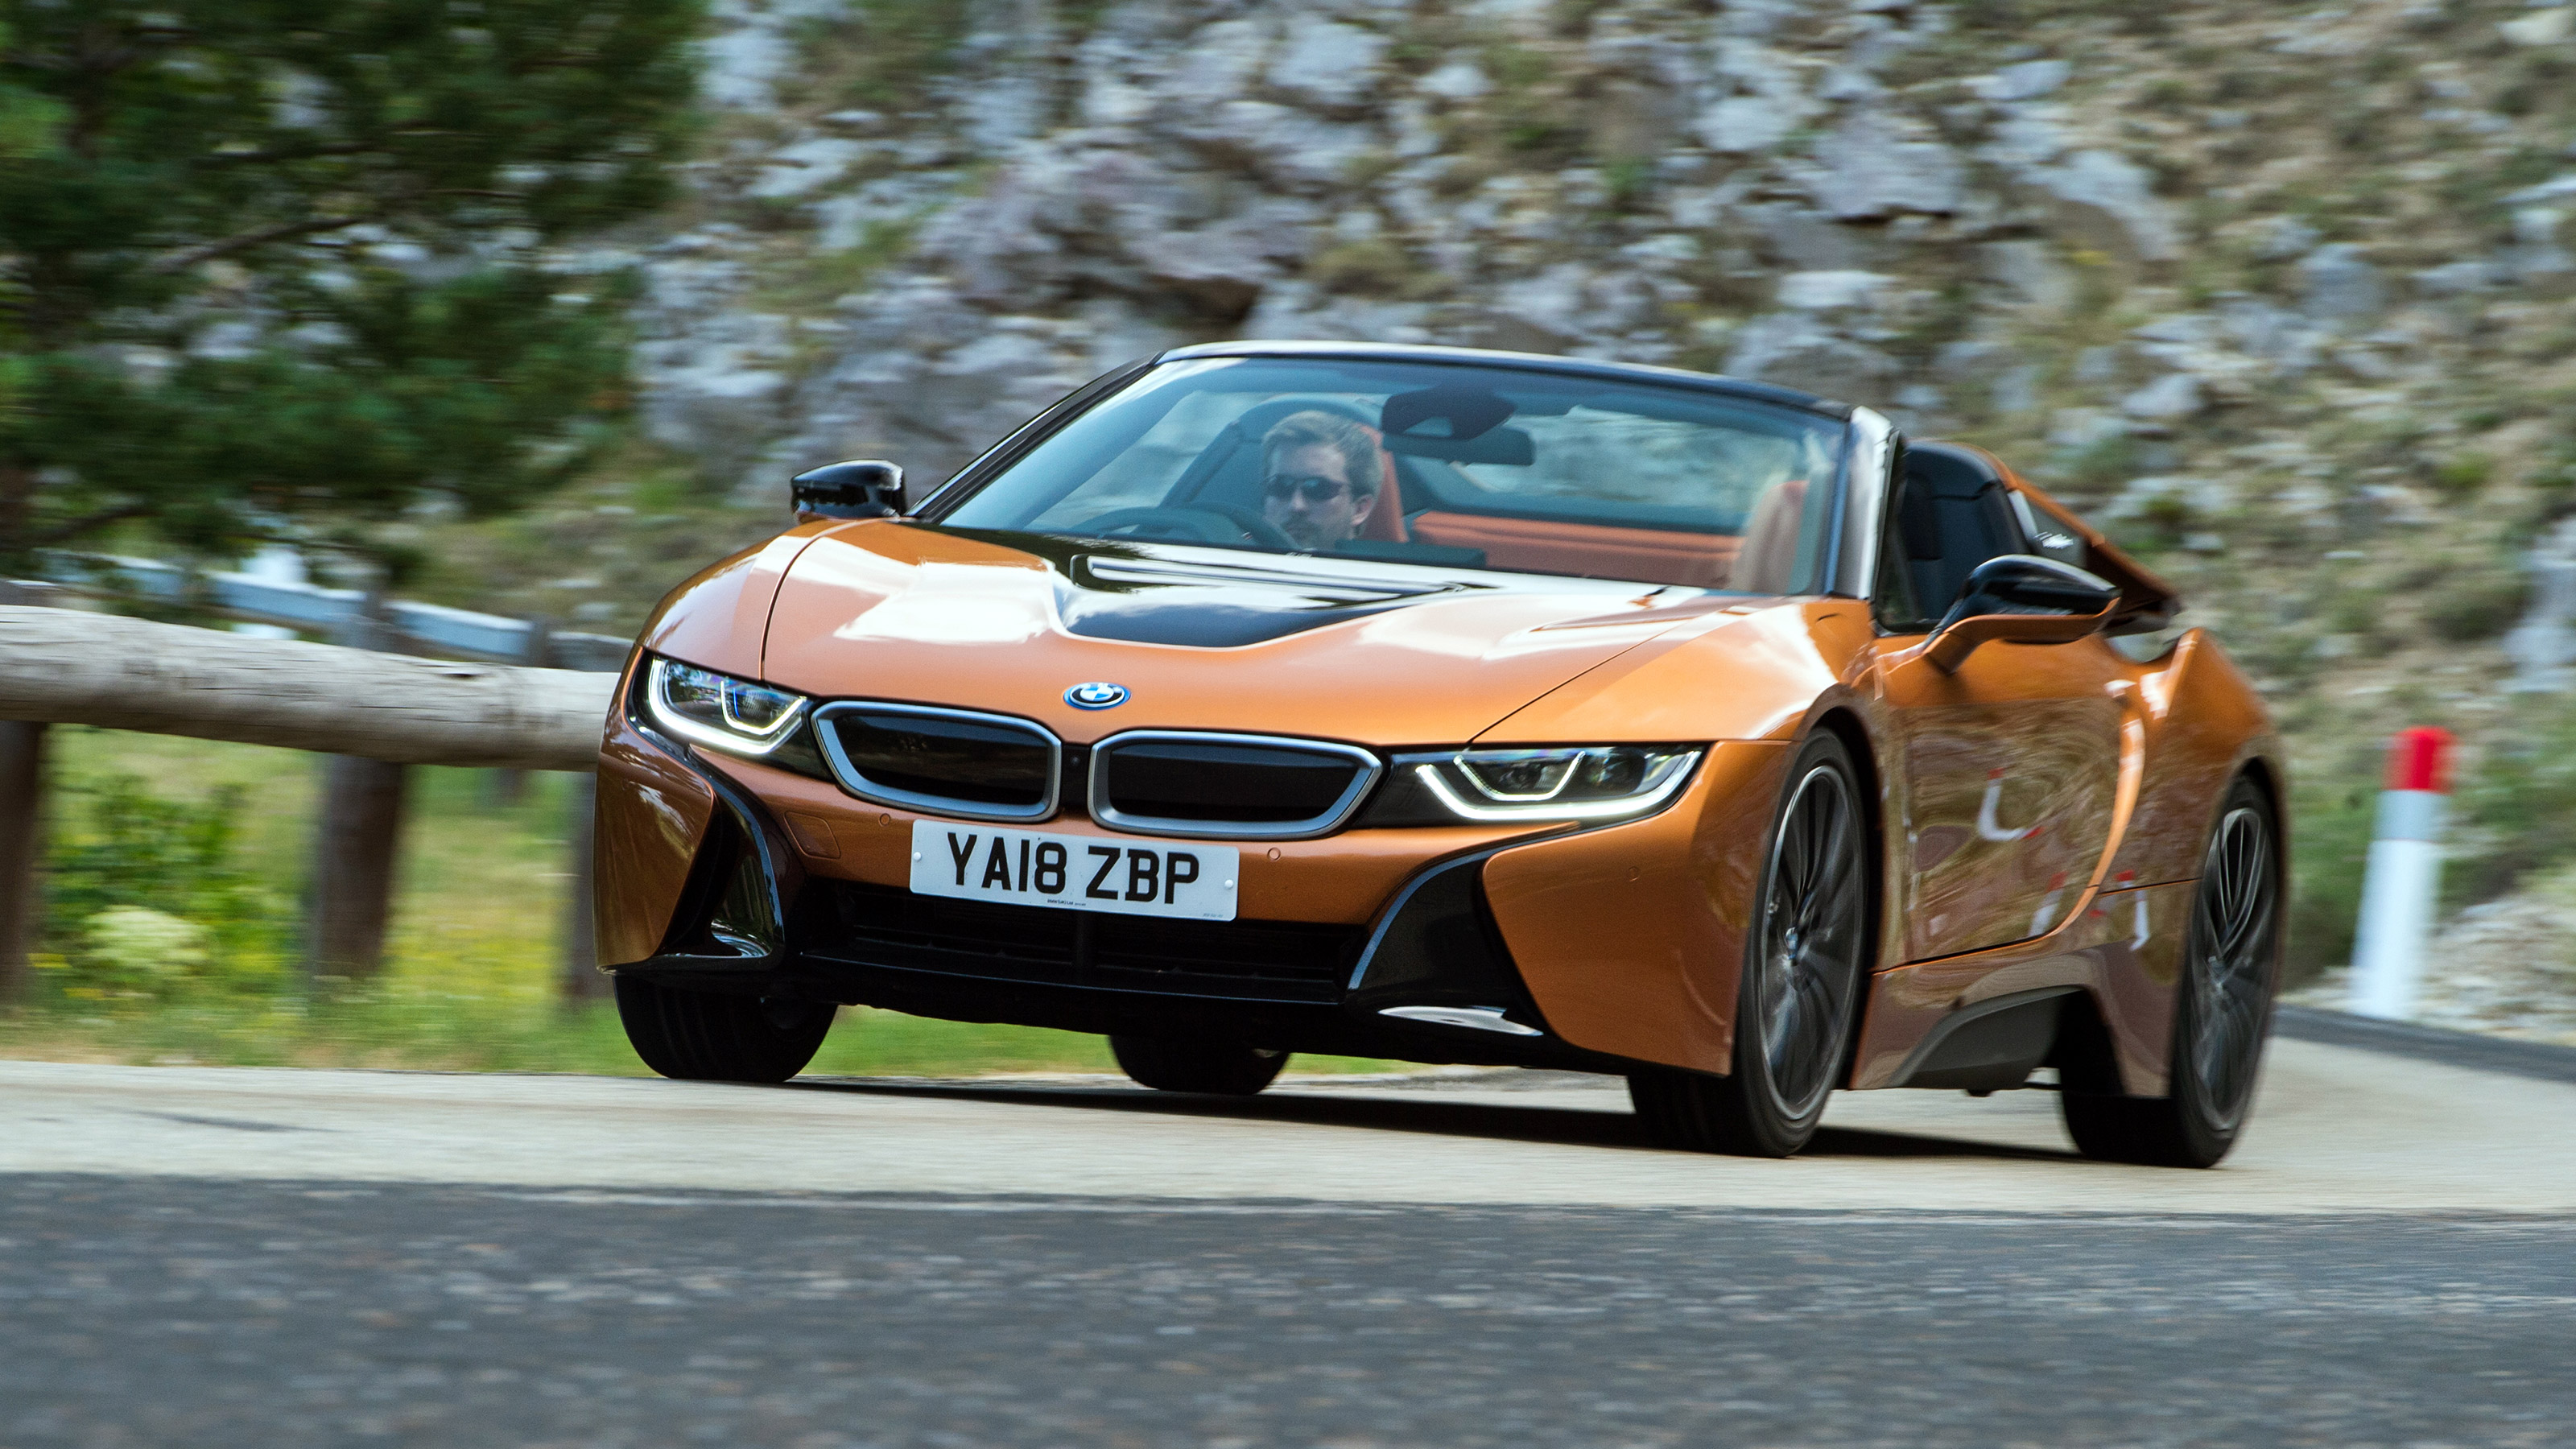 BMW Supercars A Guide to the Ultimate Driving Experience